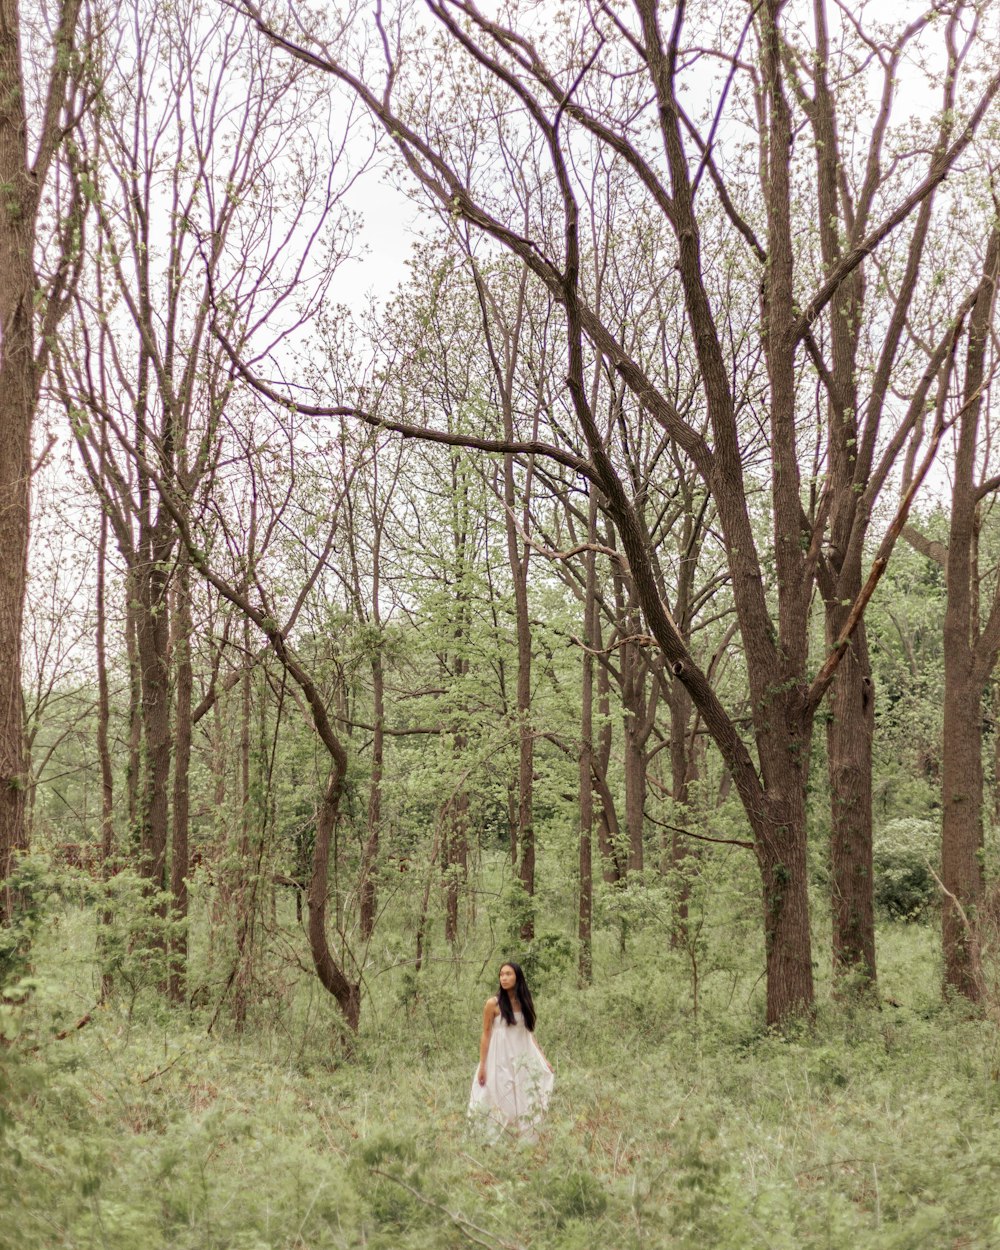 a woman in a white dress walking through a forest